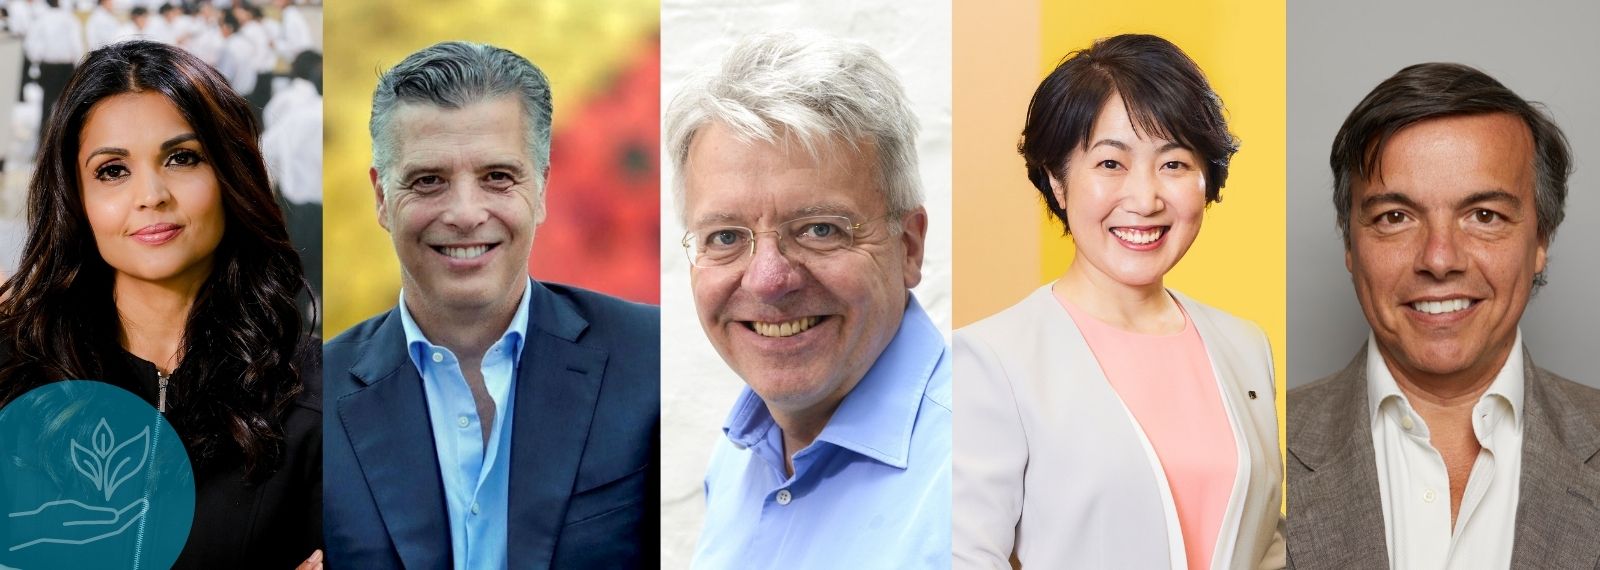 Images of the Entrepreneur of the Year Award Judges for 2022